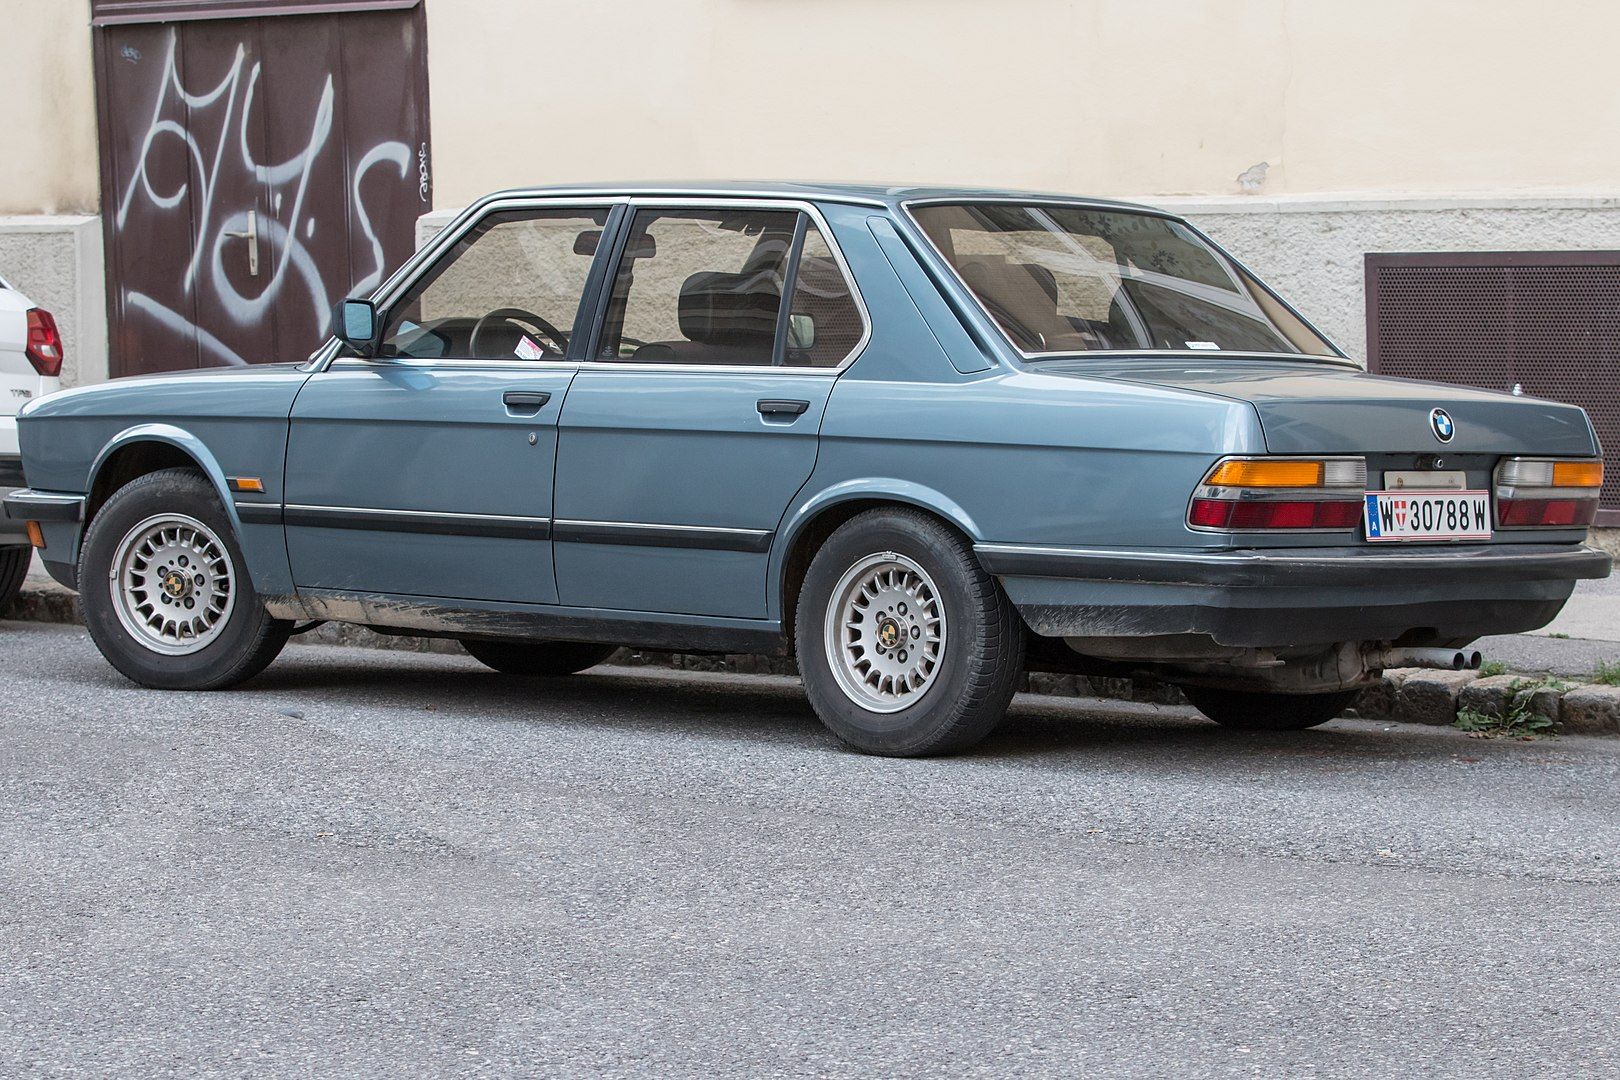 BMW 535i side and rear view, greyish blue